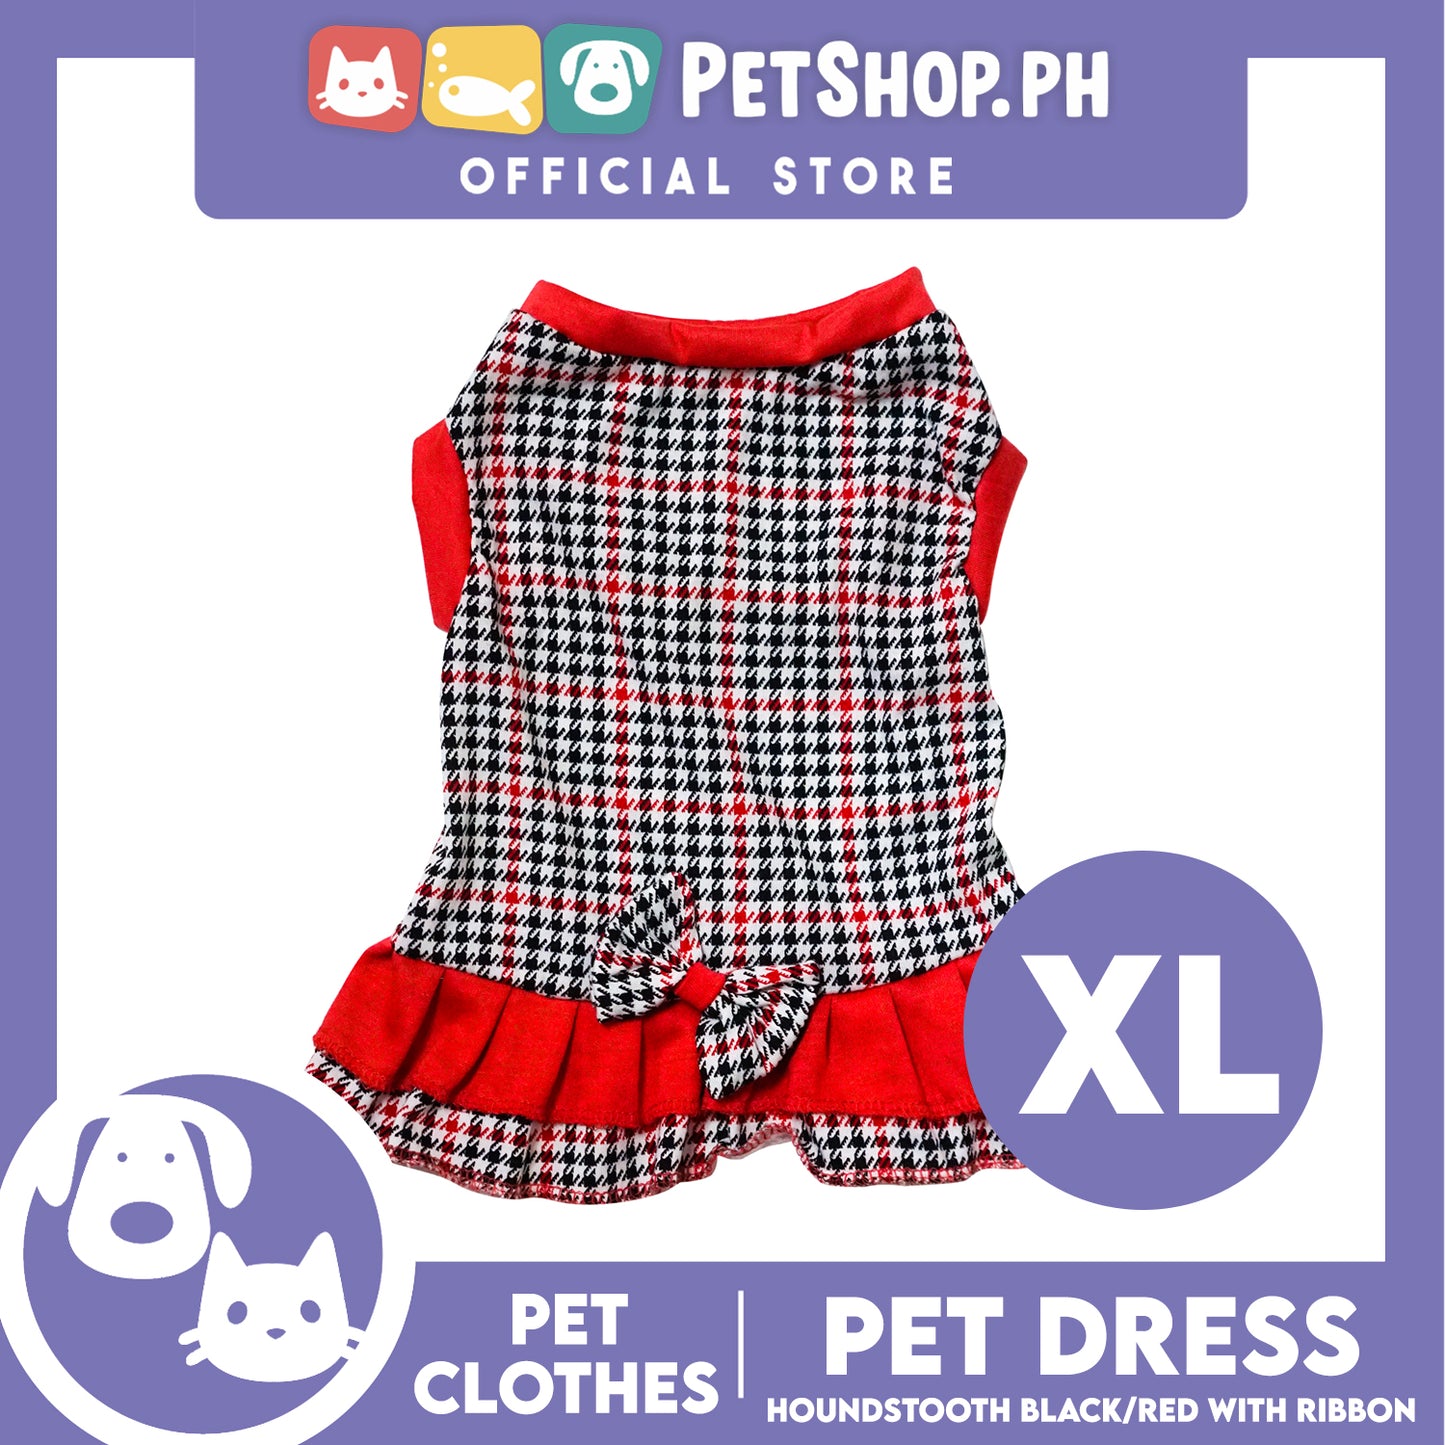 Pet Dress Houndstooth Black/Red with ribbon (Extra Large) Pet Dress Clothes Perfect for Dogs